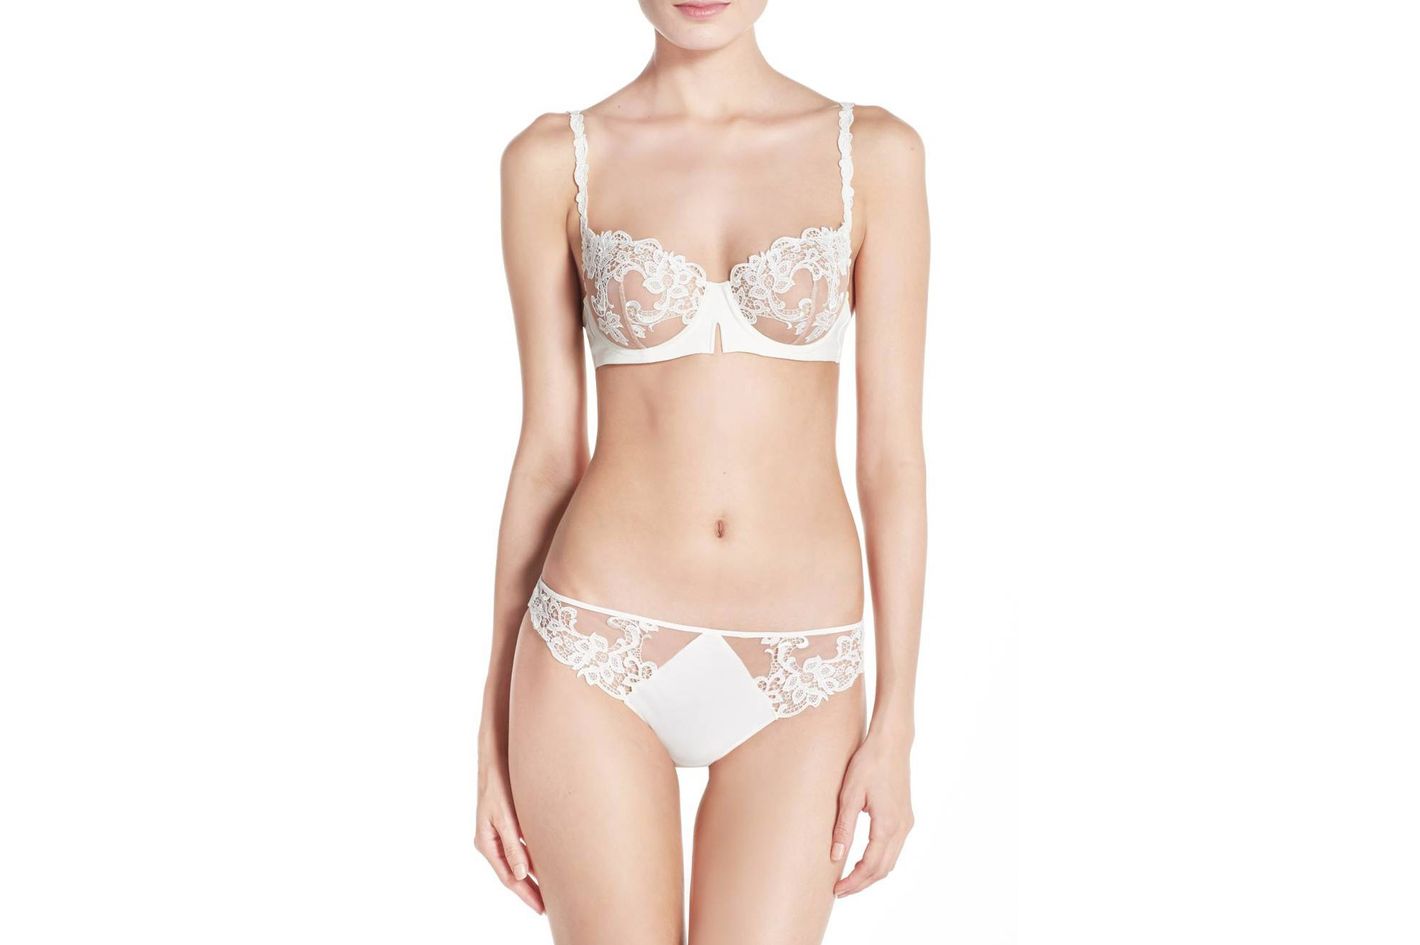 The Prettiest Bridal Lingerie for Your Wedding and Honeymoon